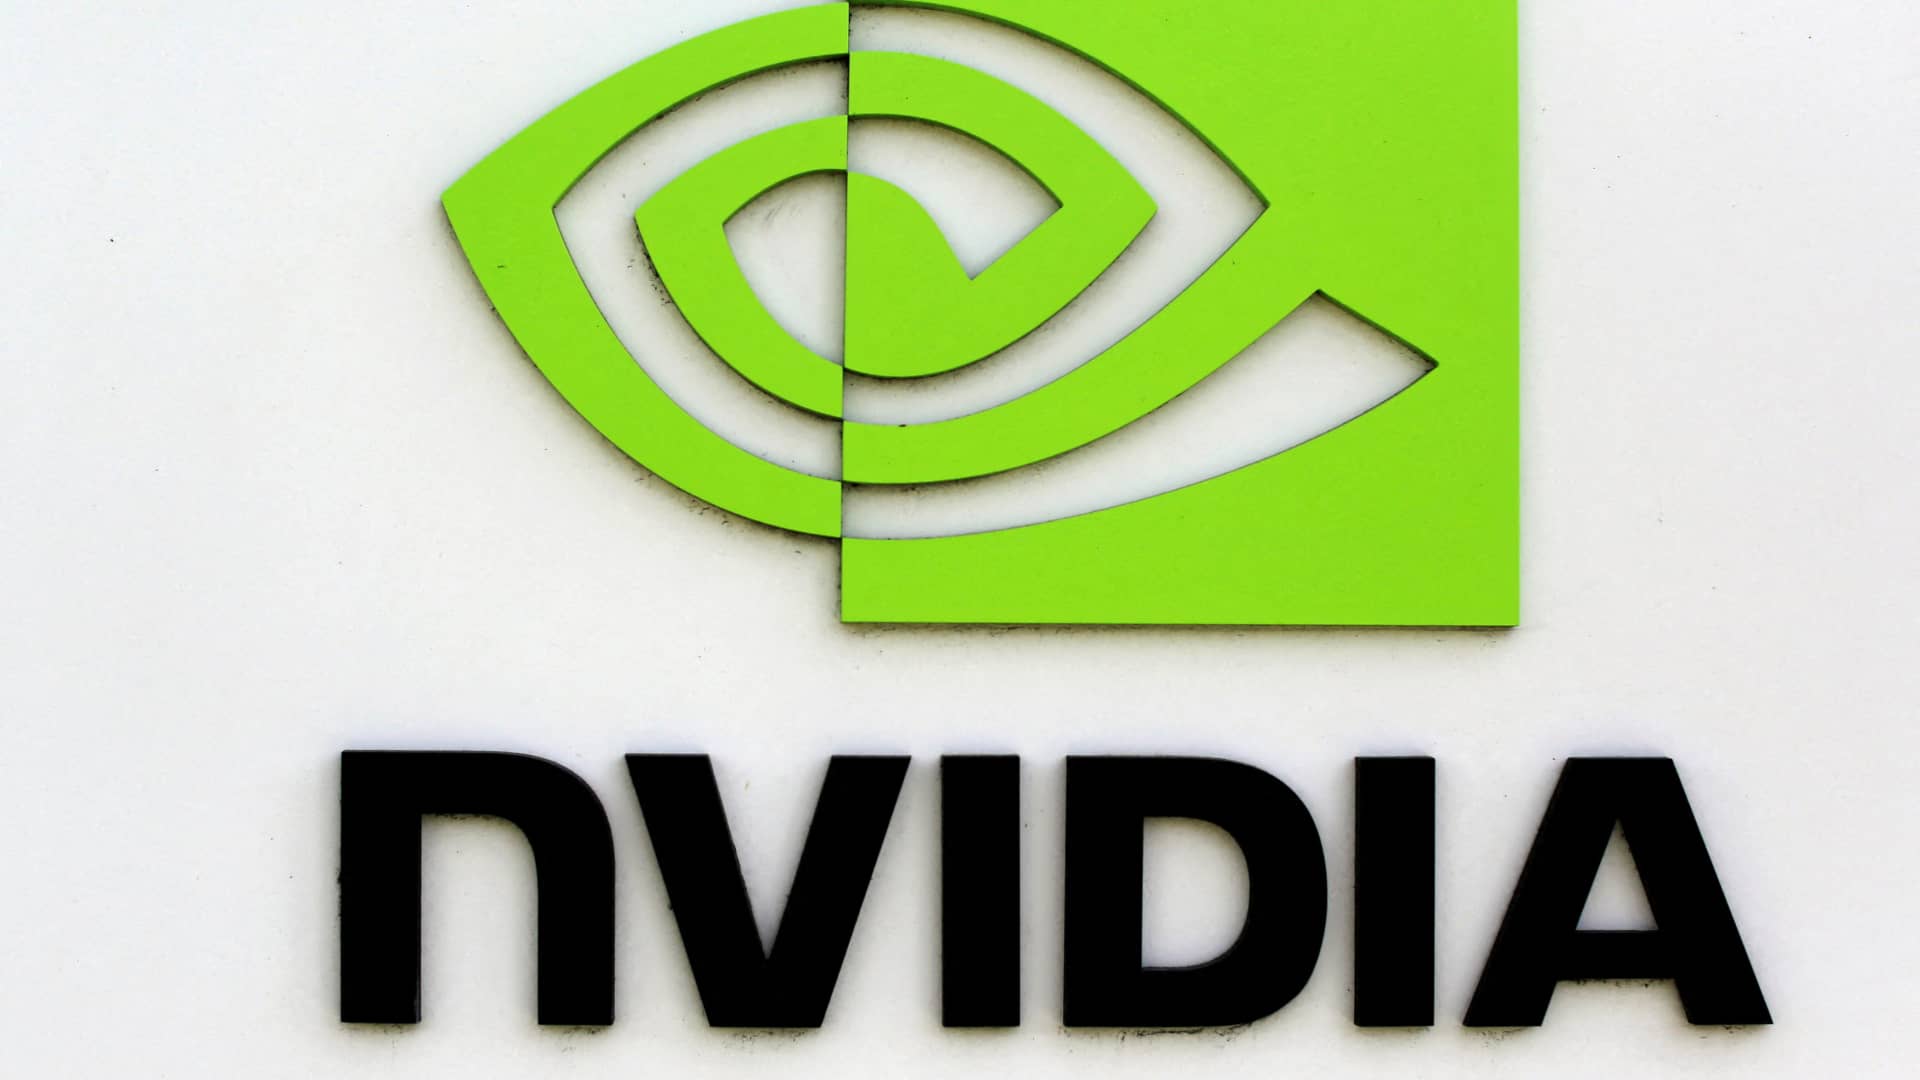 Nvidia plans to build a $200 million AI center in Indonesia amid push into Southeast Asia